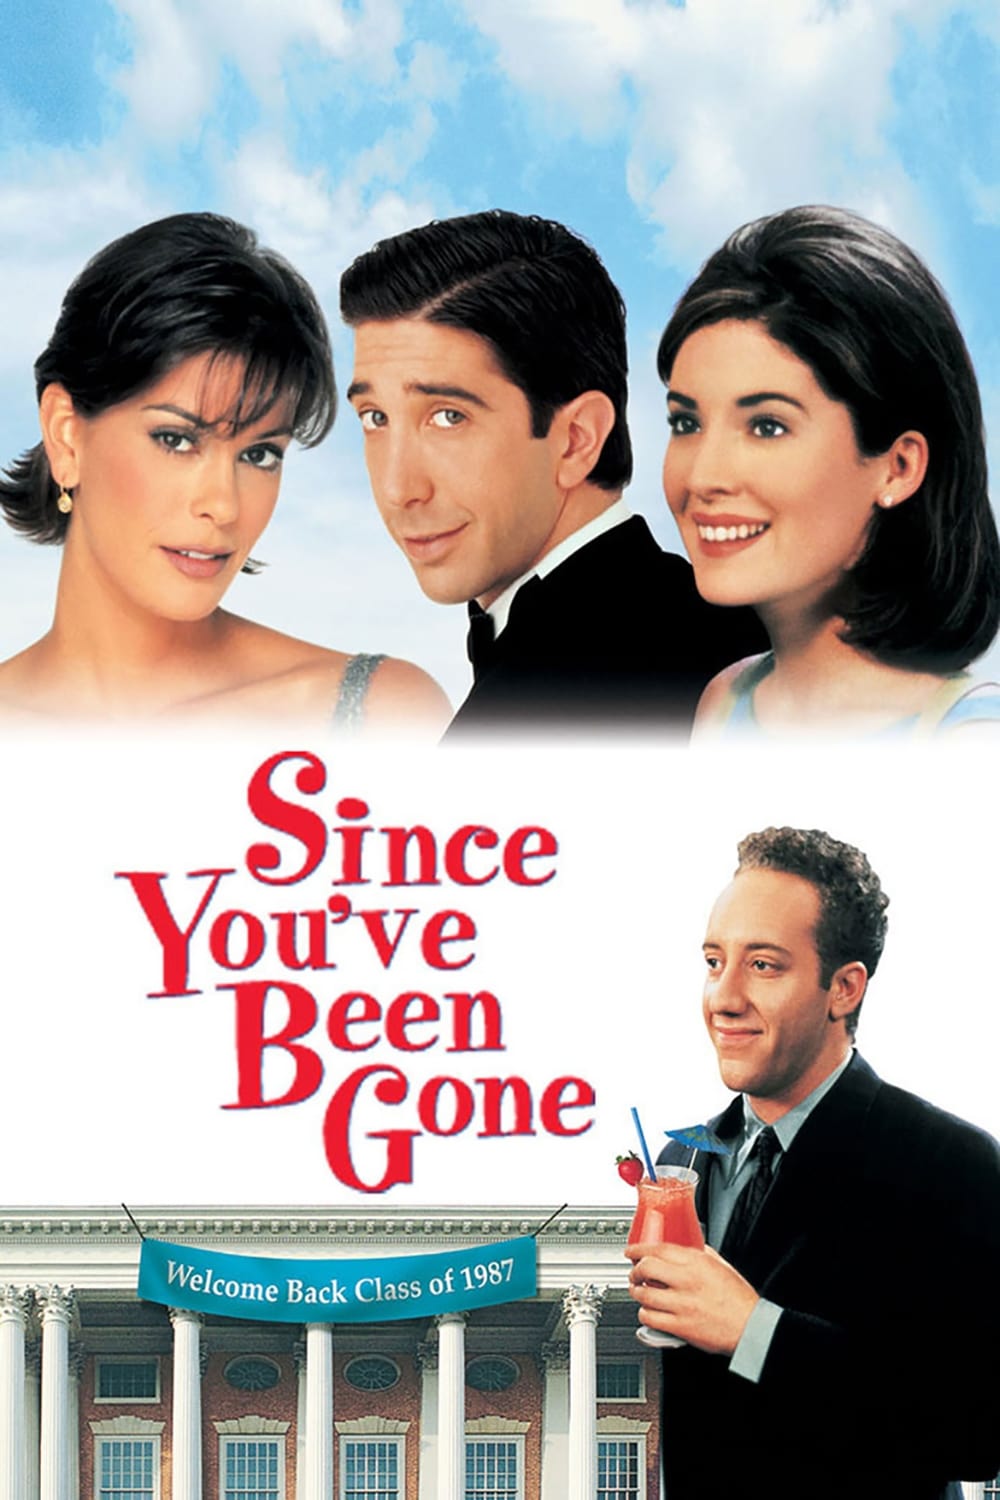 Since You've Been Gone (1998)